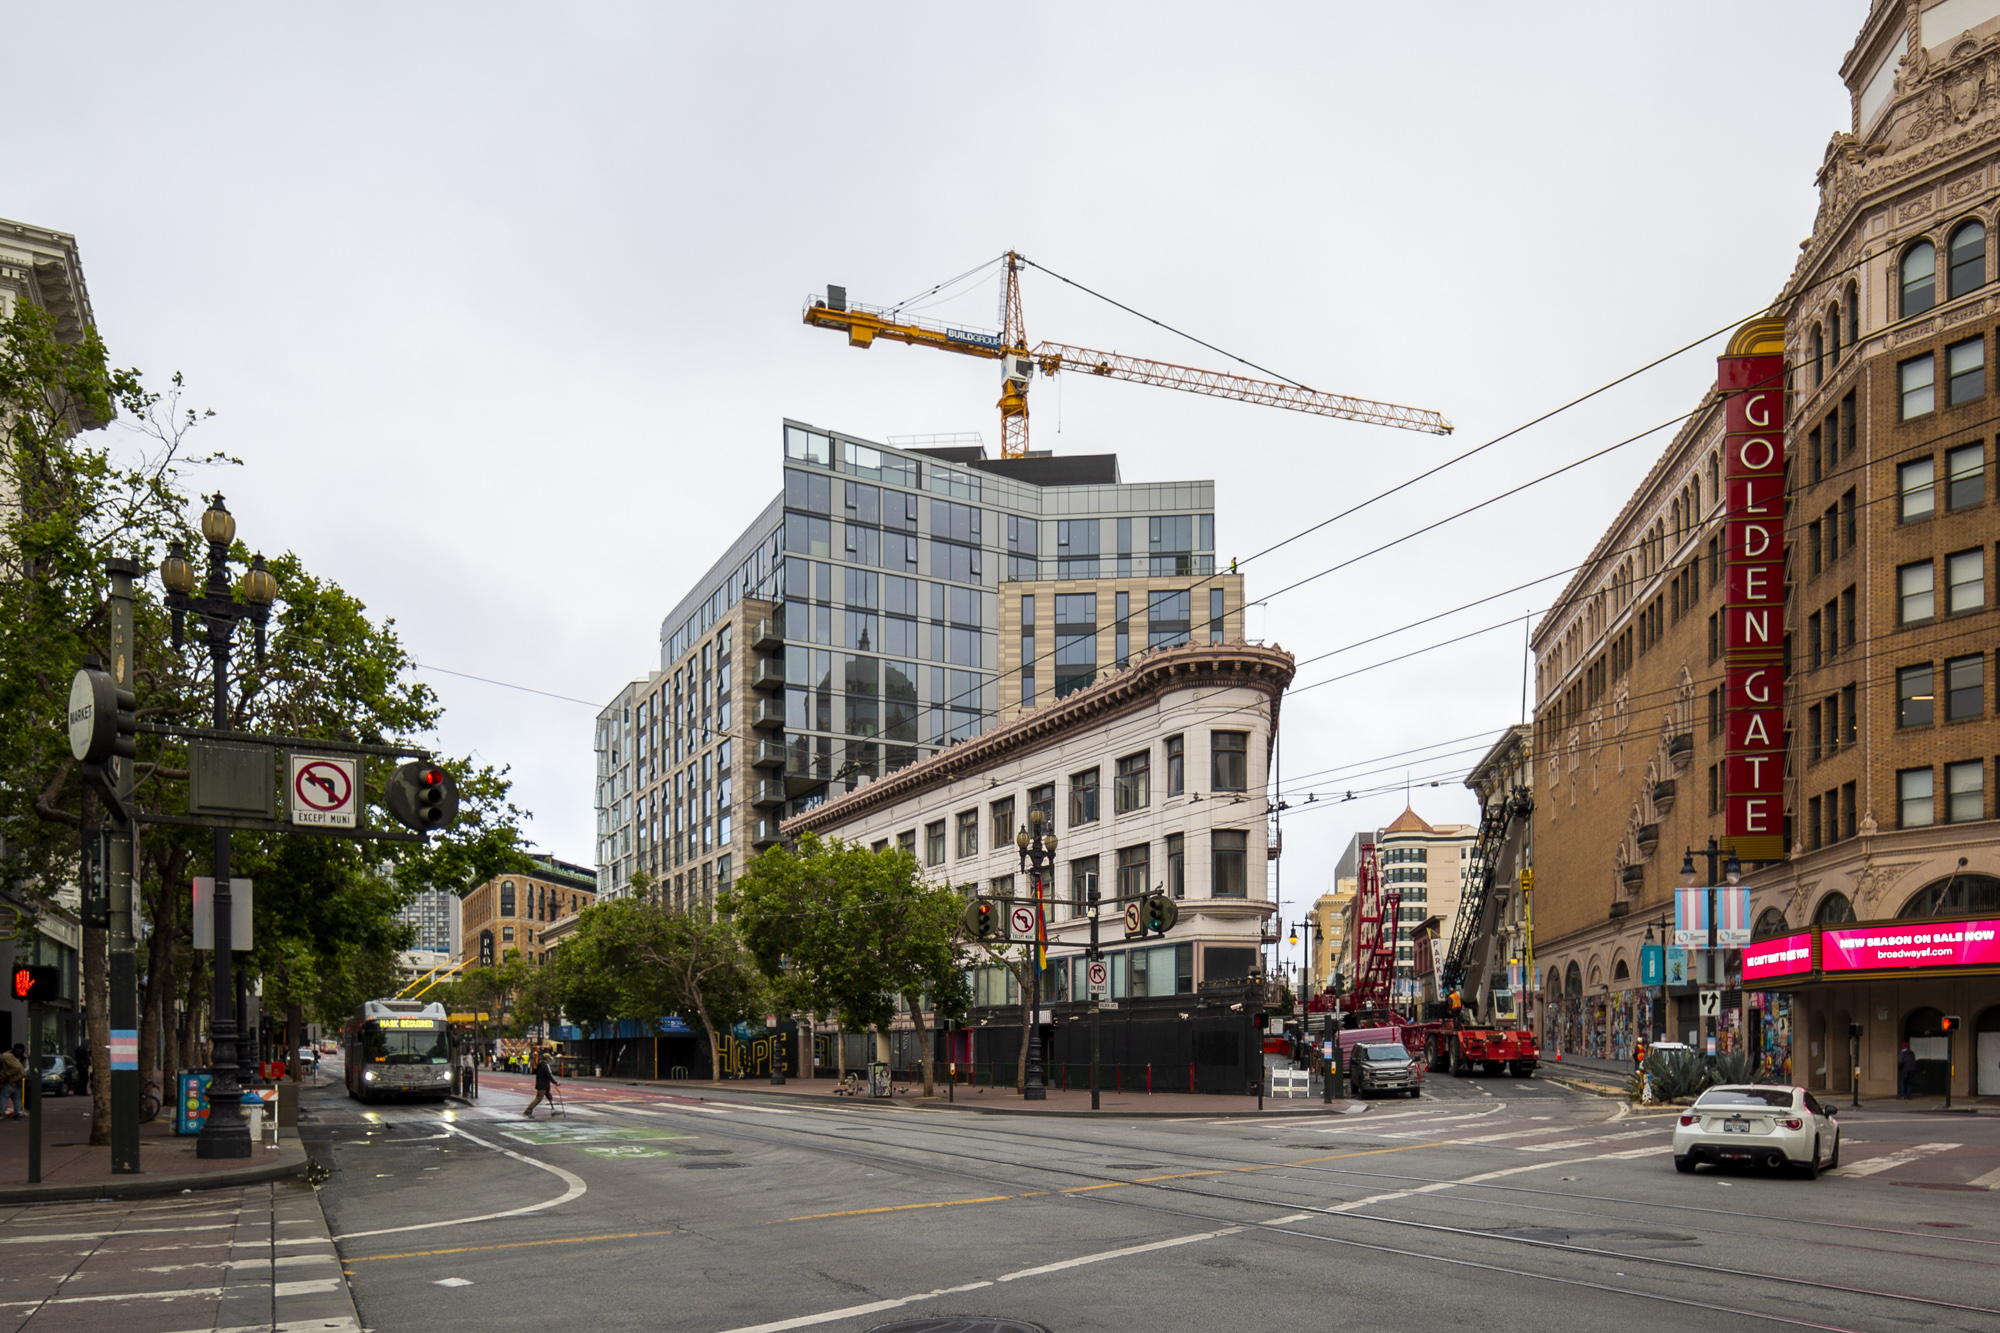 1028 Market Street at the intersection with Golden Gate Avenue, image by Andrew Campbell Nelson